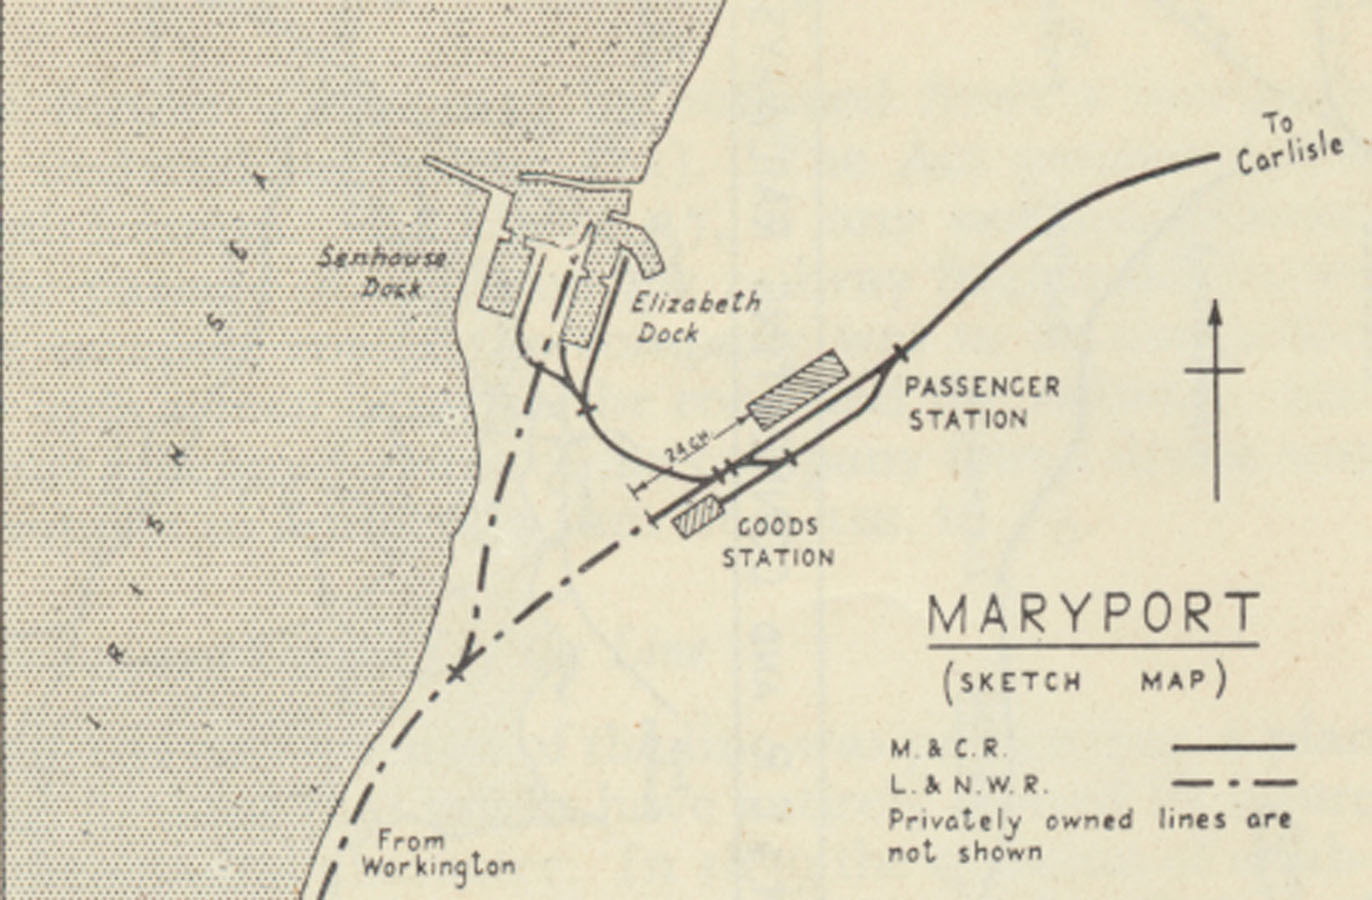 Map Maryport Station And Rail Route To Elizabeth Dock And Senhouse Dock